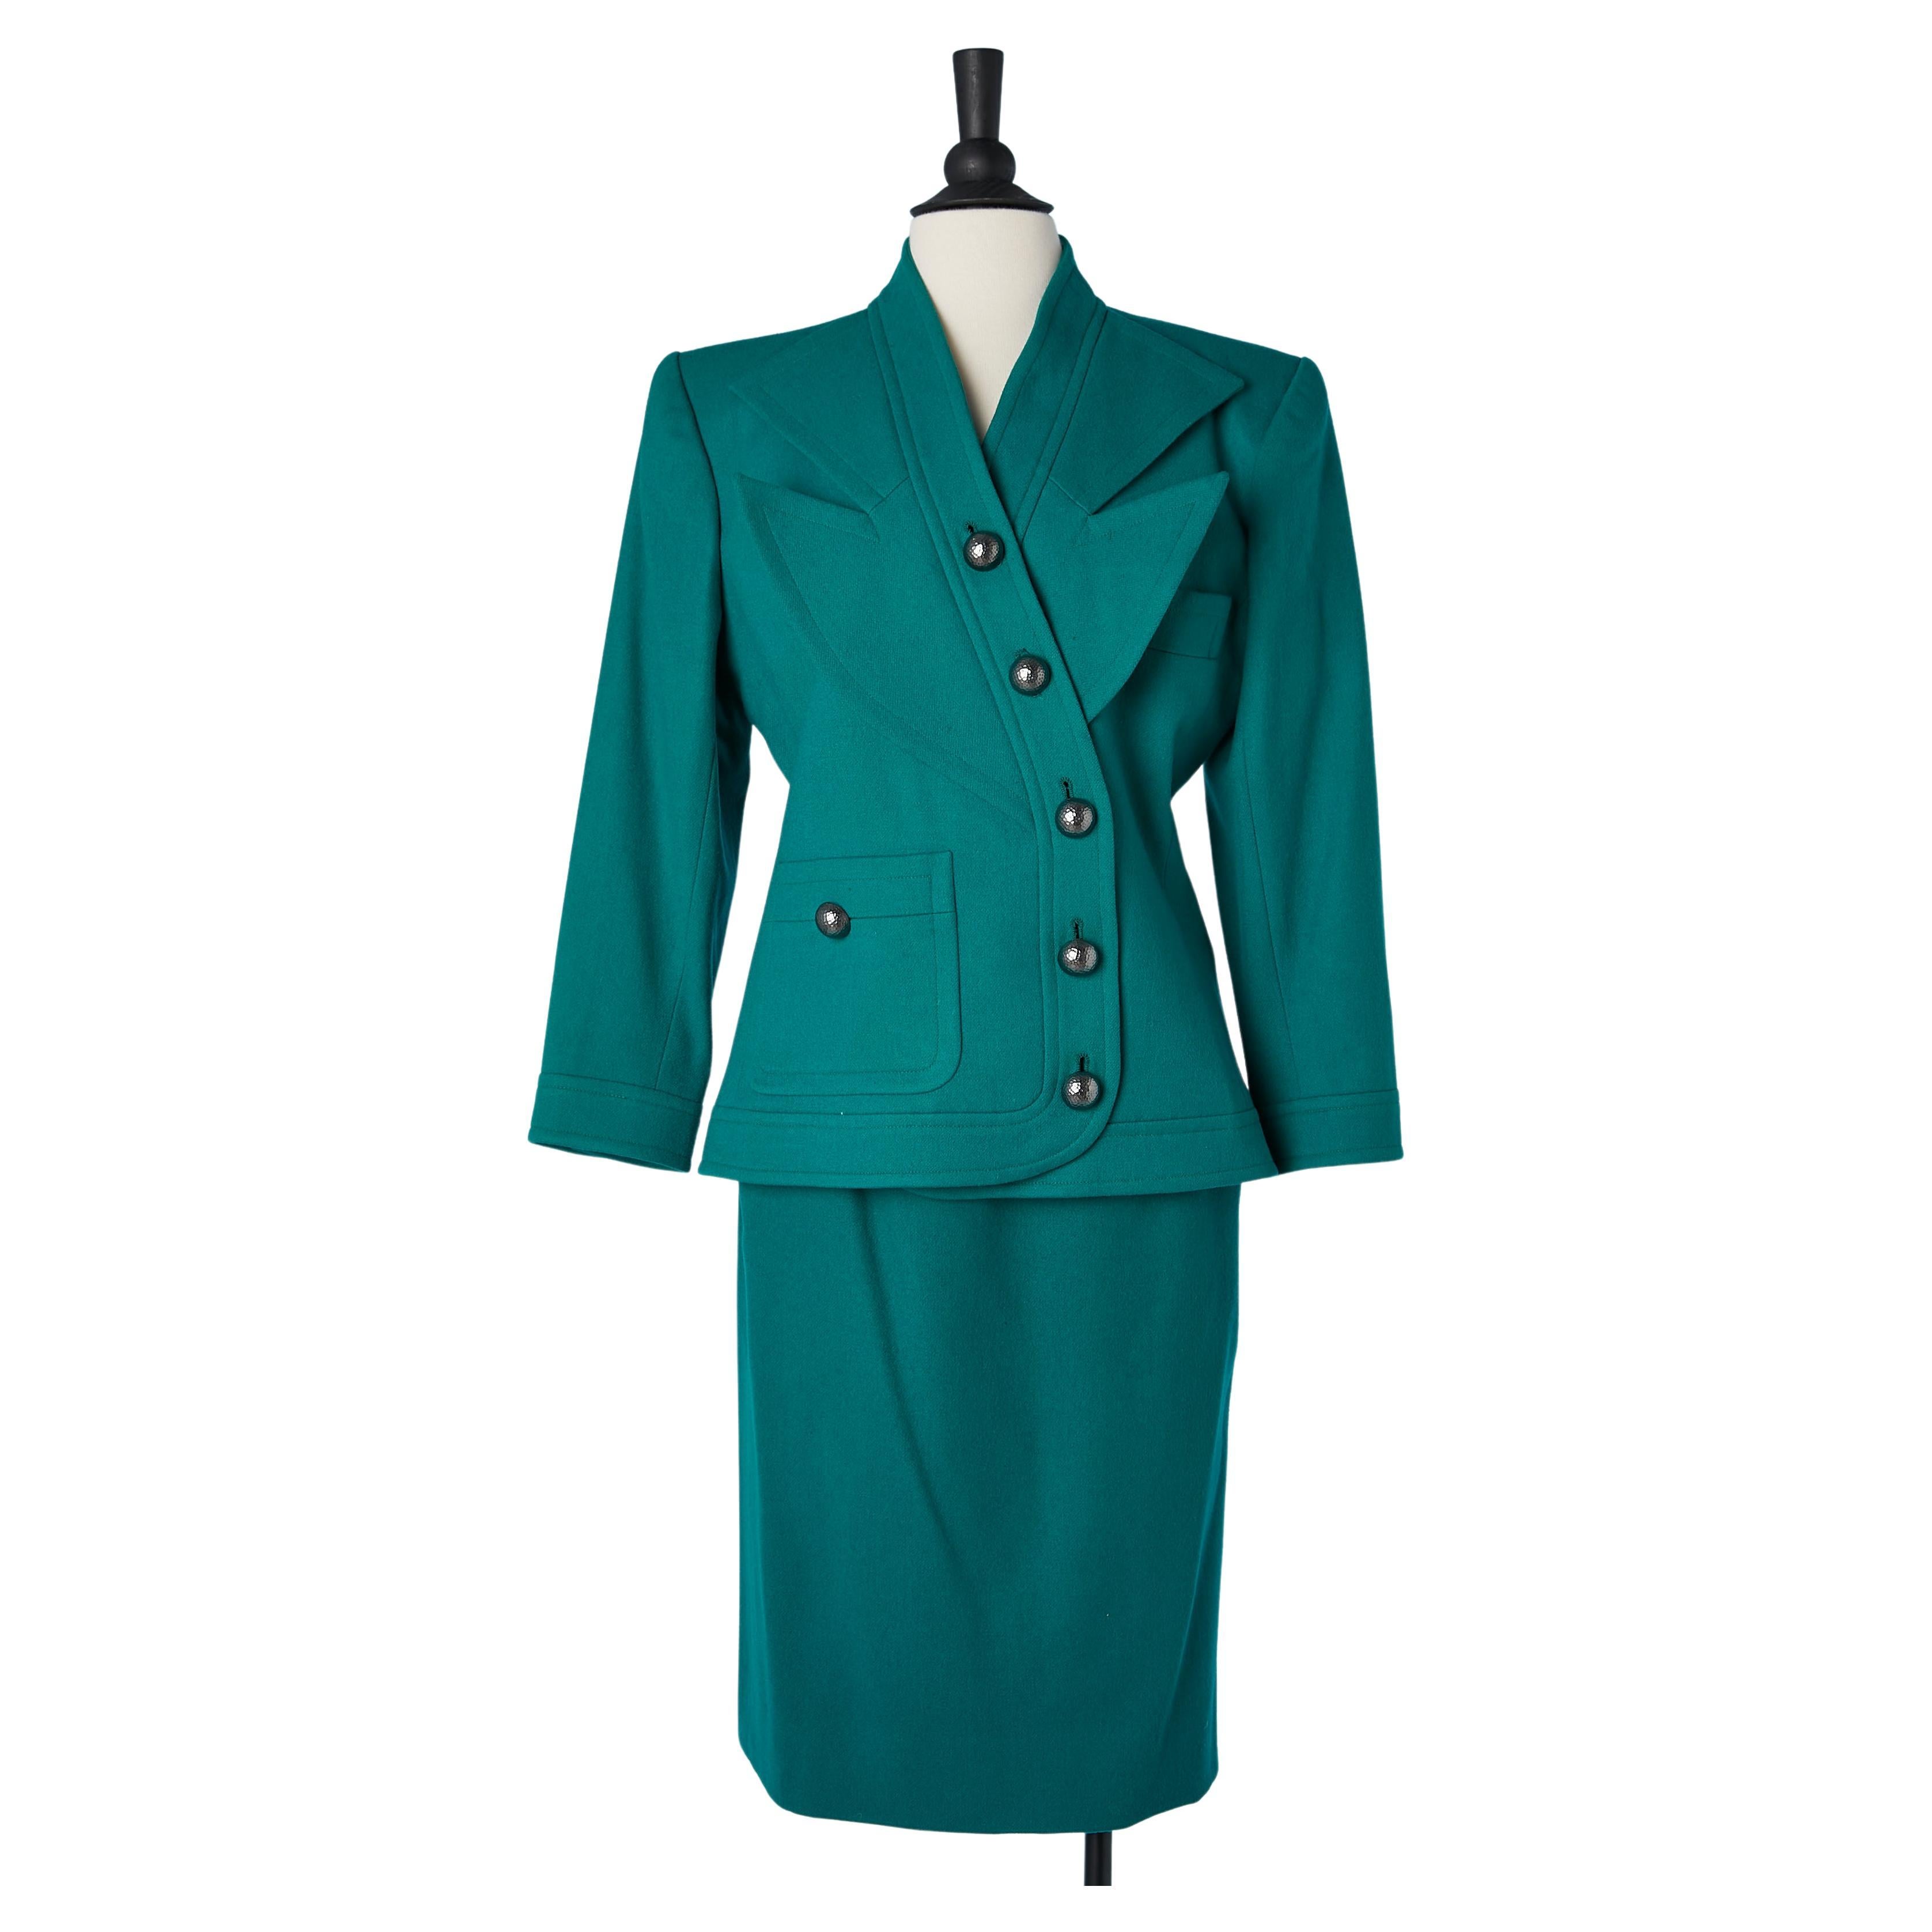 Green wool skirt-suit with graphic collar Saint Laurent Rive Gauche Circa 1980's